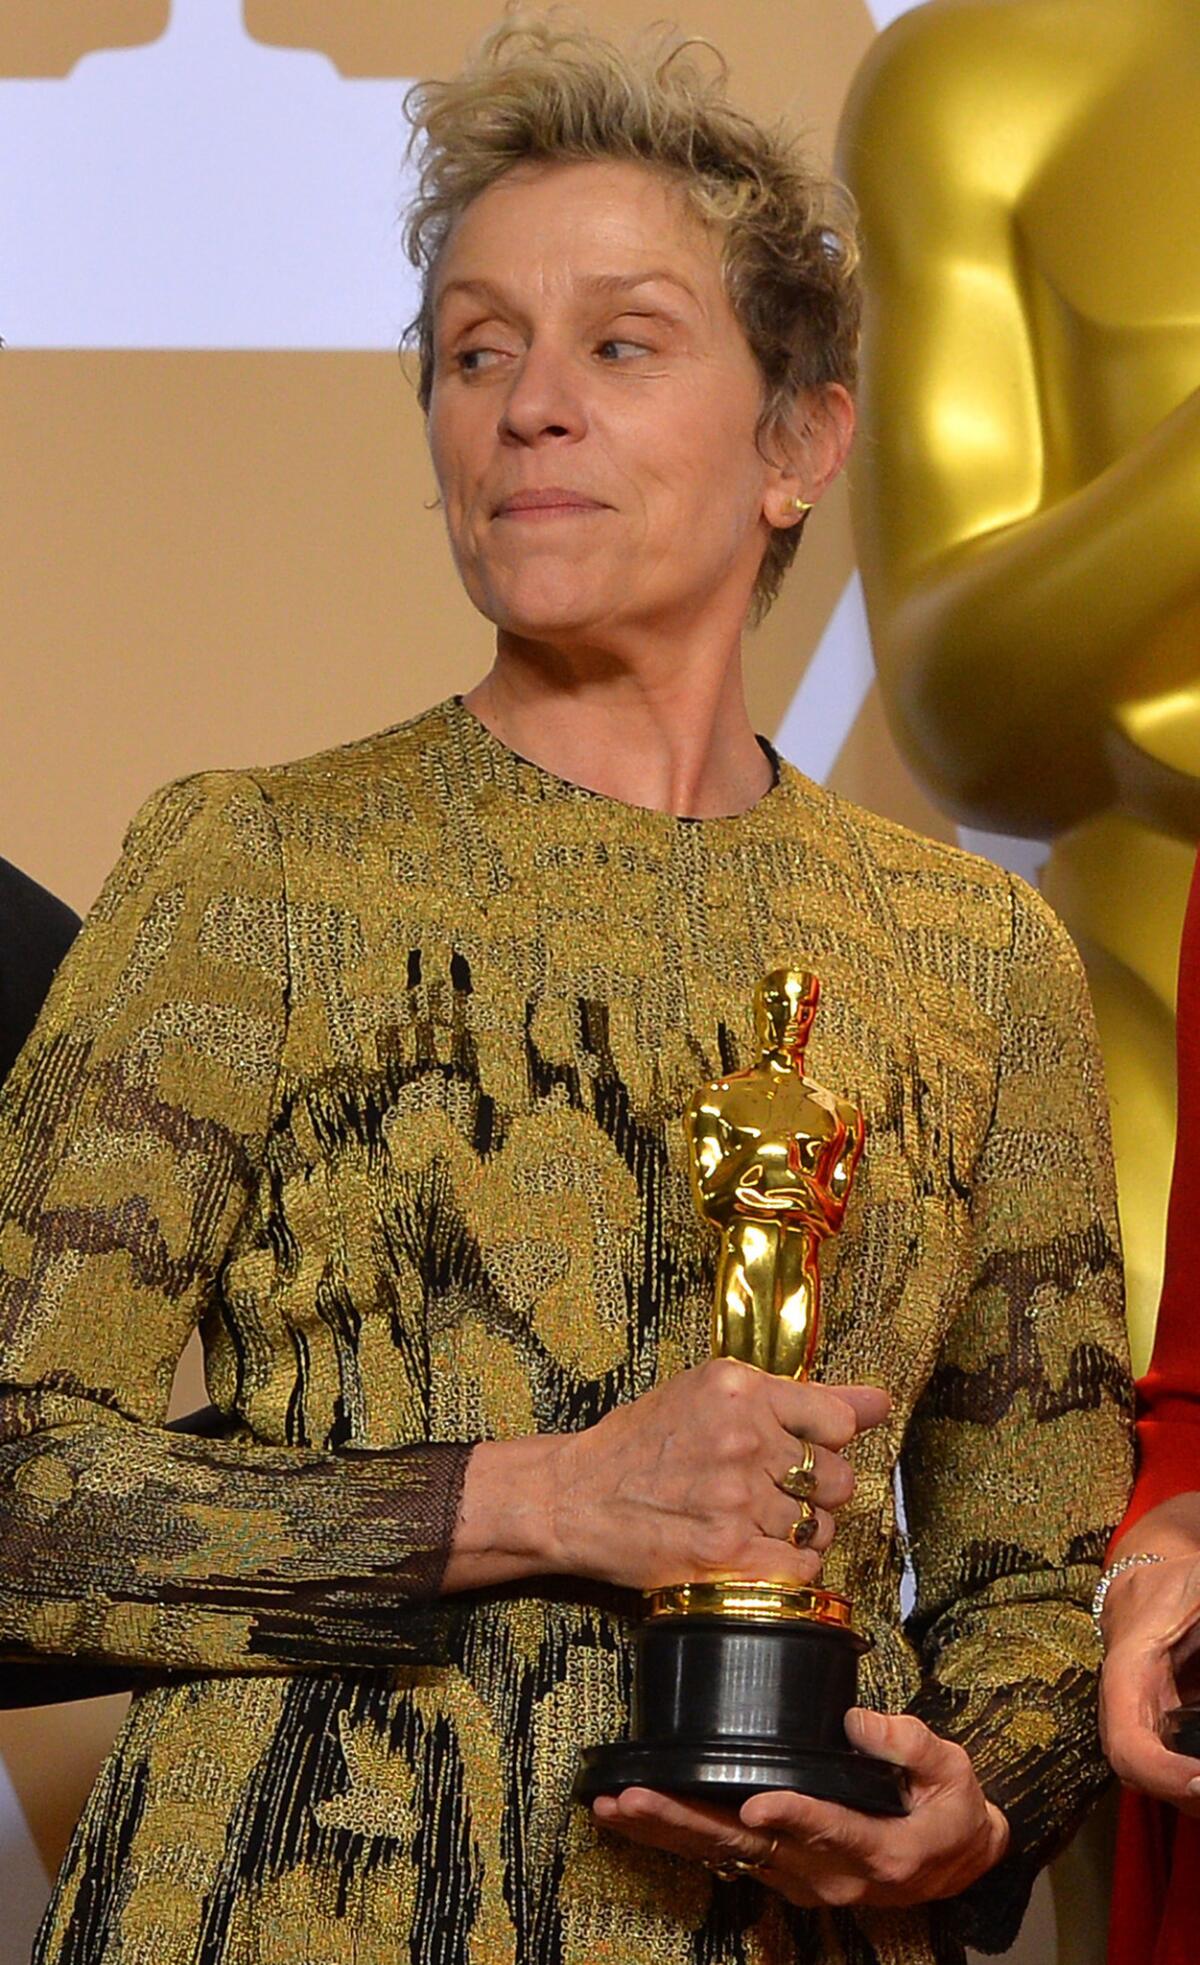 Best actress winner Frances McDormand holds her Oscar backstage at the 90th Academy Awards in 2018.